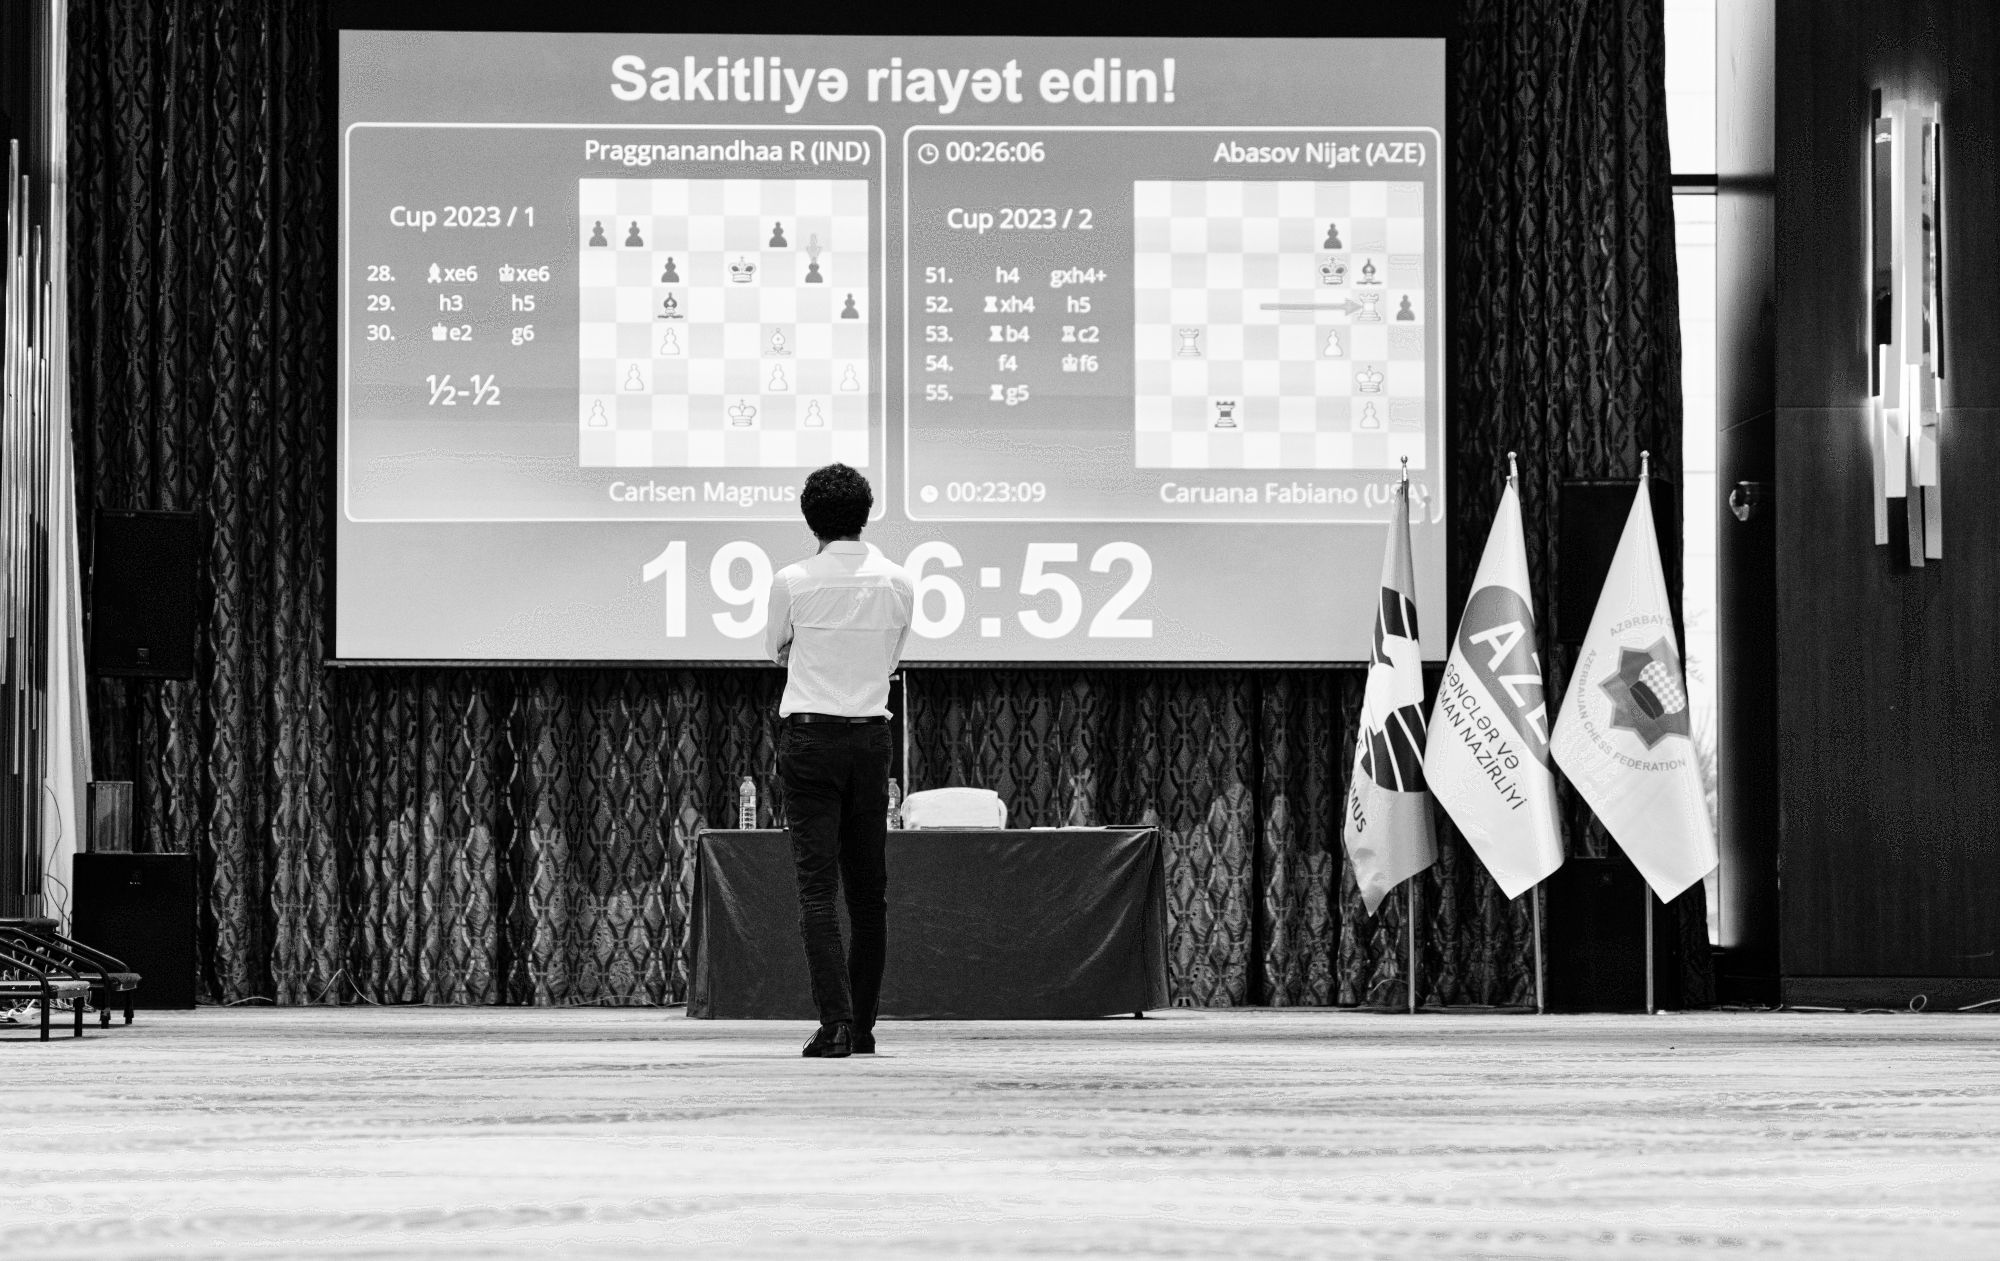 Chess World Cup: Praggnanandhaa digs his heels in to settle for a 78-move  draw against Caruana in semifinals